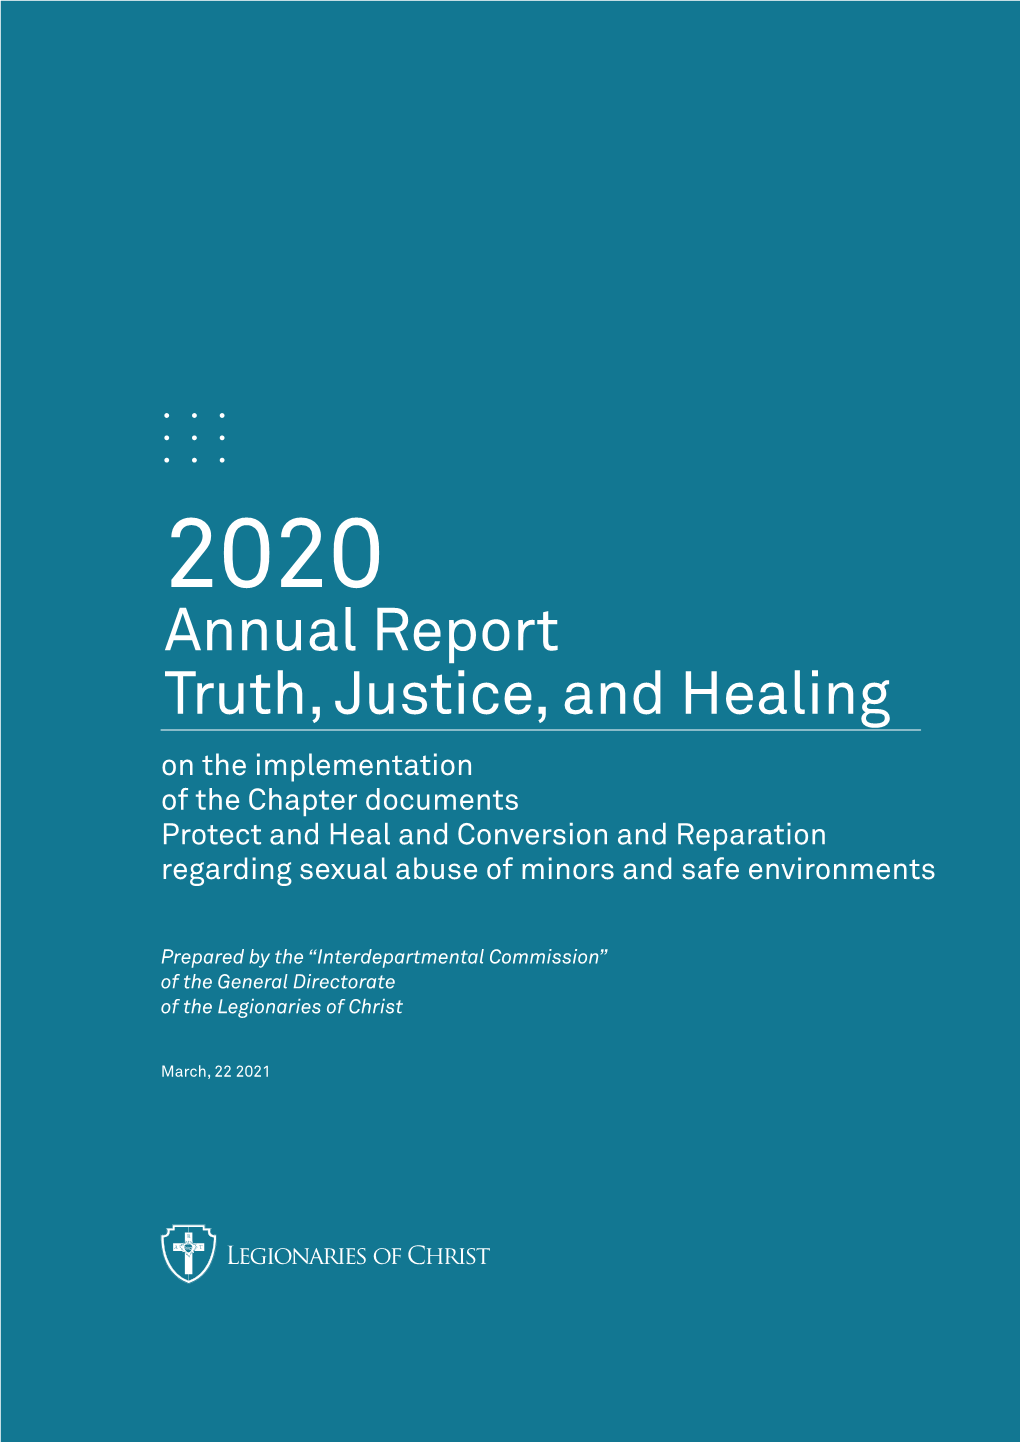 Annual Report Truth, Justice, and Healing